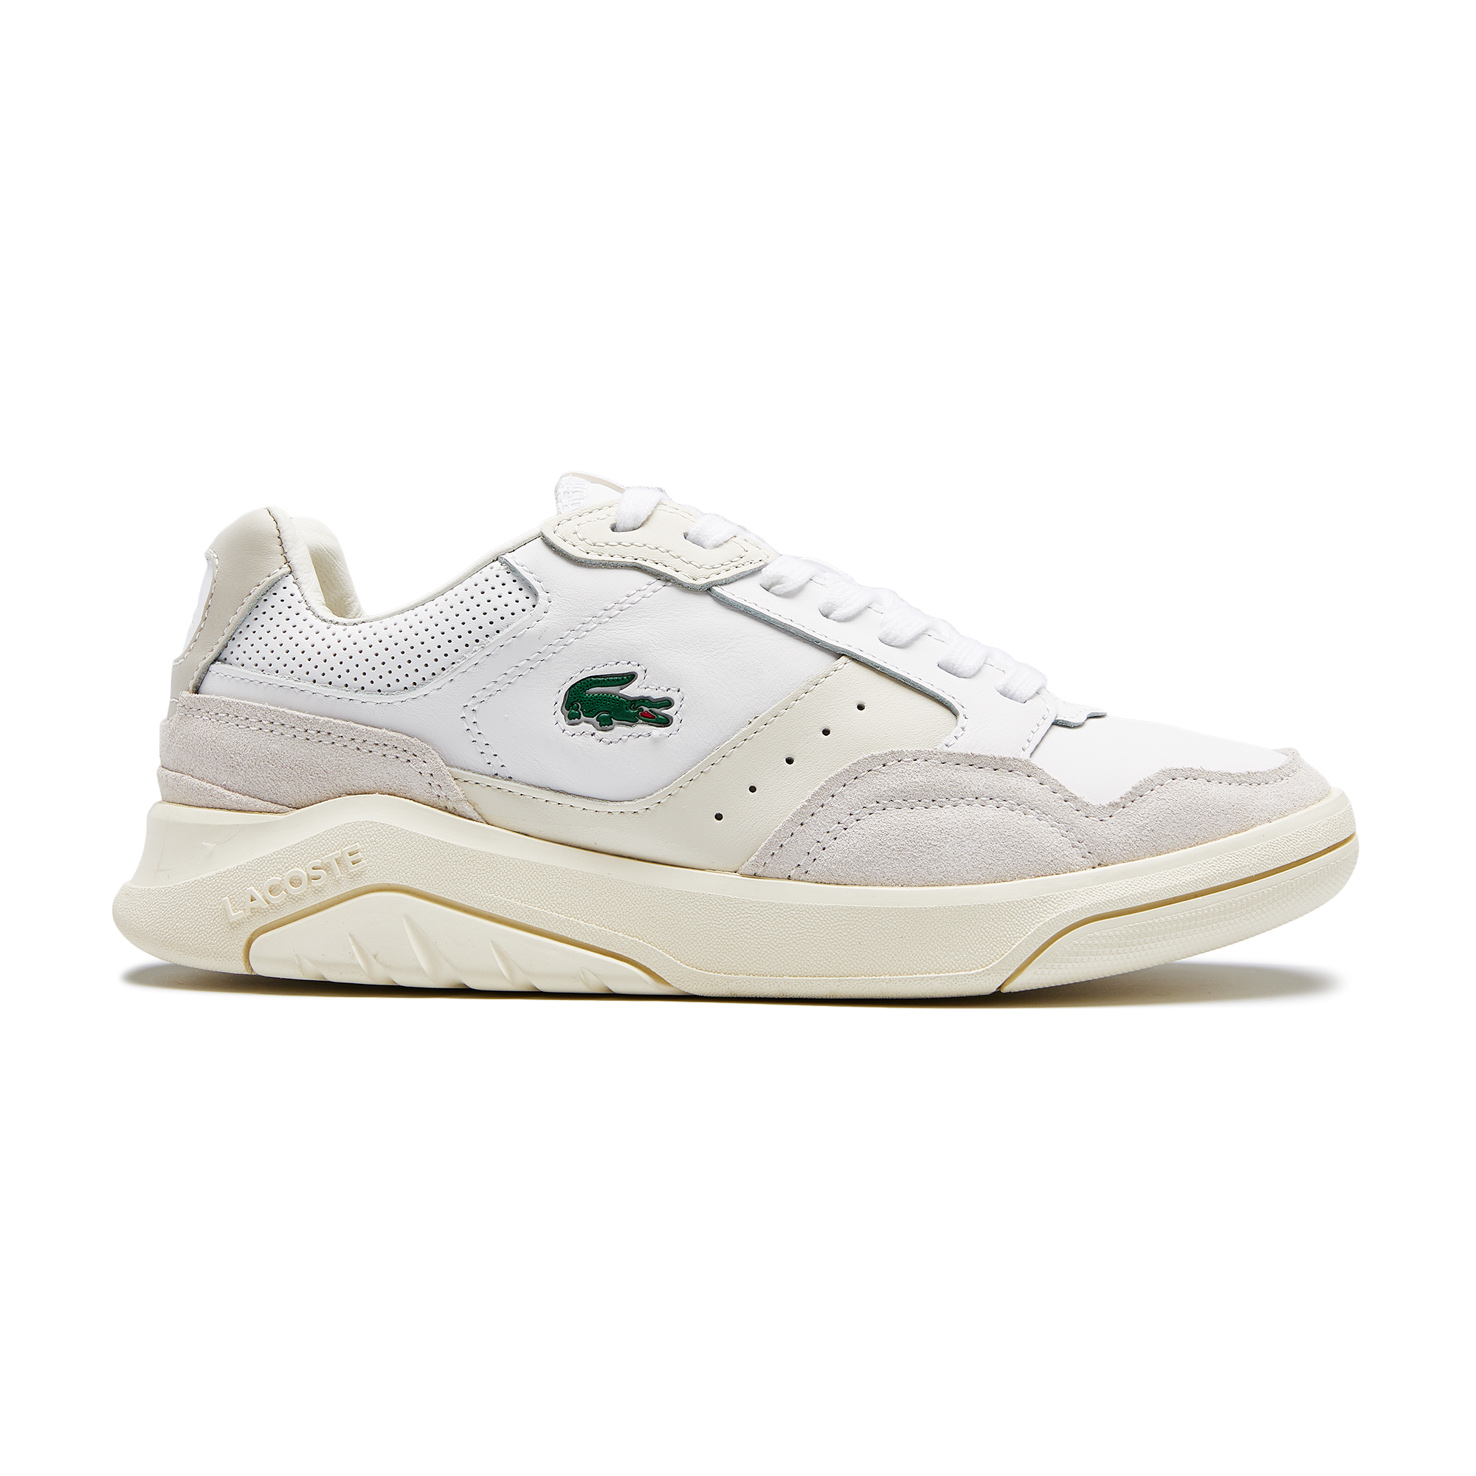 GAME ADVANCE LUXE LACOSTE, размер 36, цвет розовый 741SFA0065 - фото 1